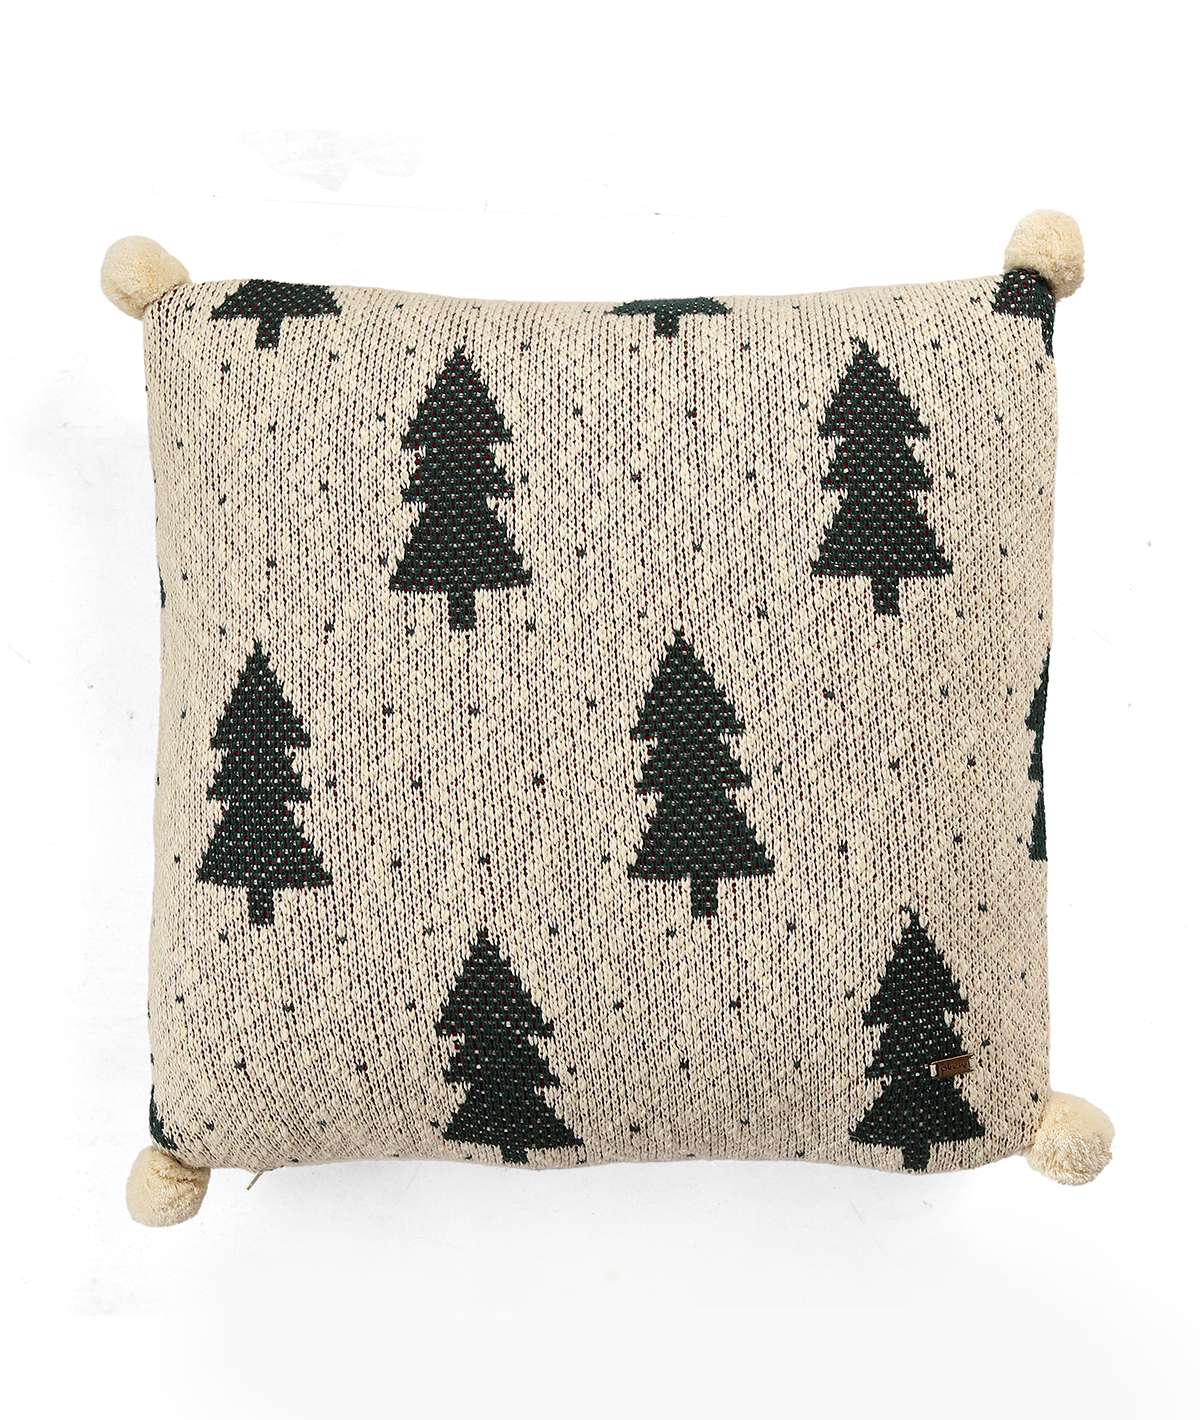 Xmas Tree & Dot Cotton Knitted Decorative Green & Natural Color 18 x 18 Inches Cushion Cover